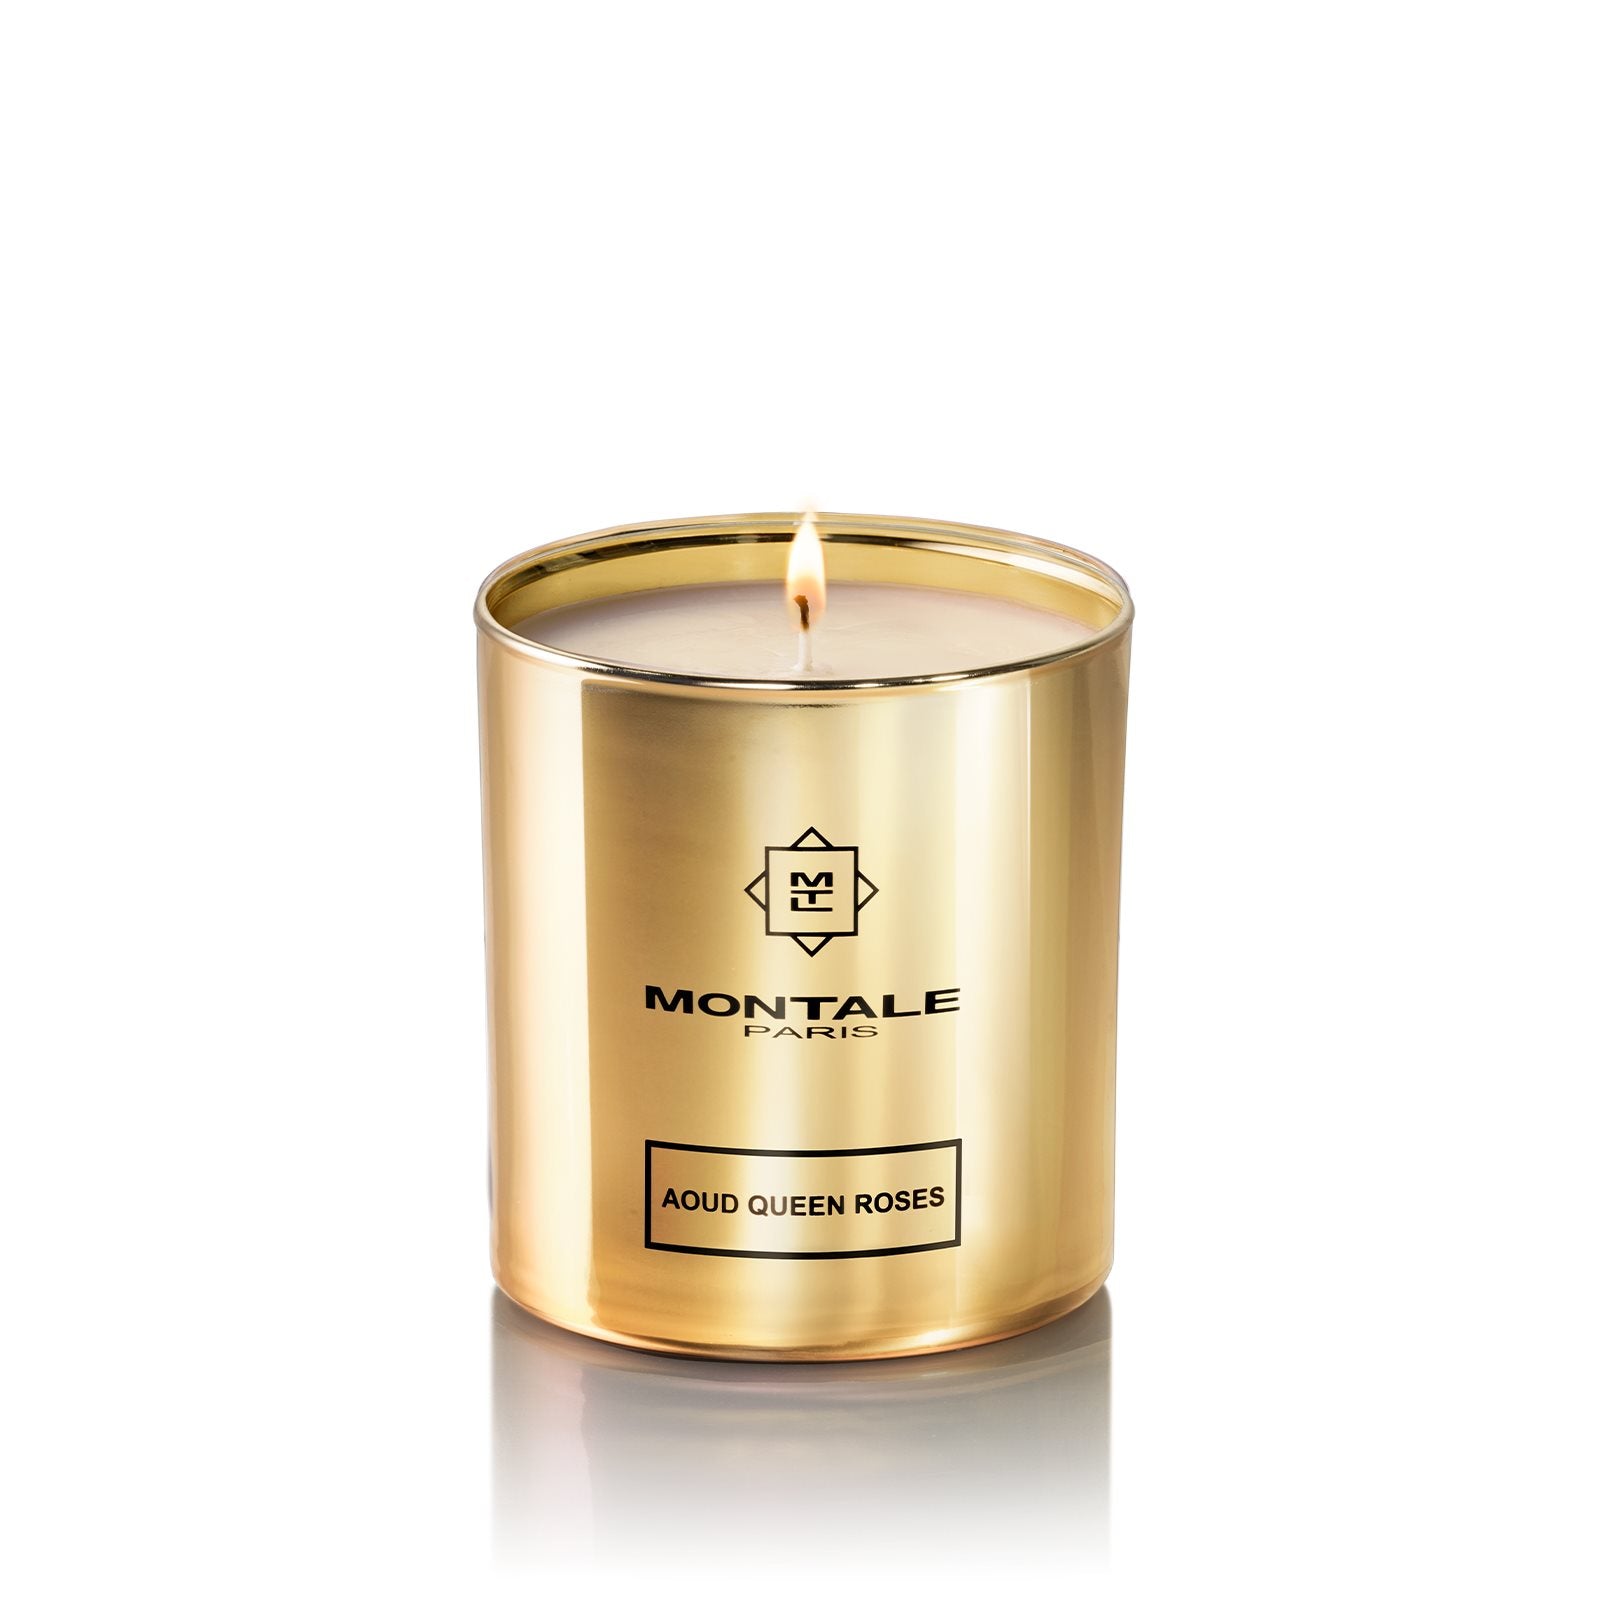 AOUD QUEEN ROSES CANDLE